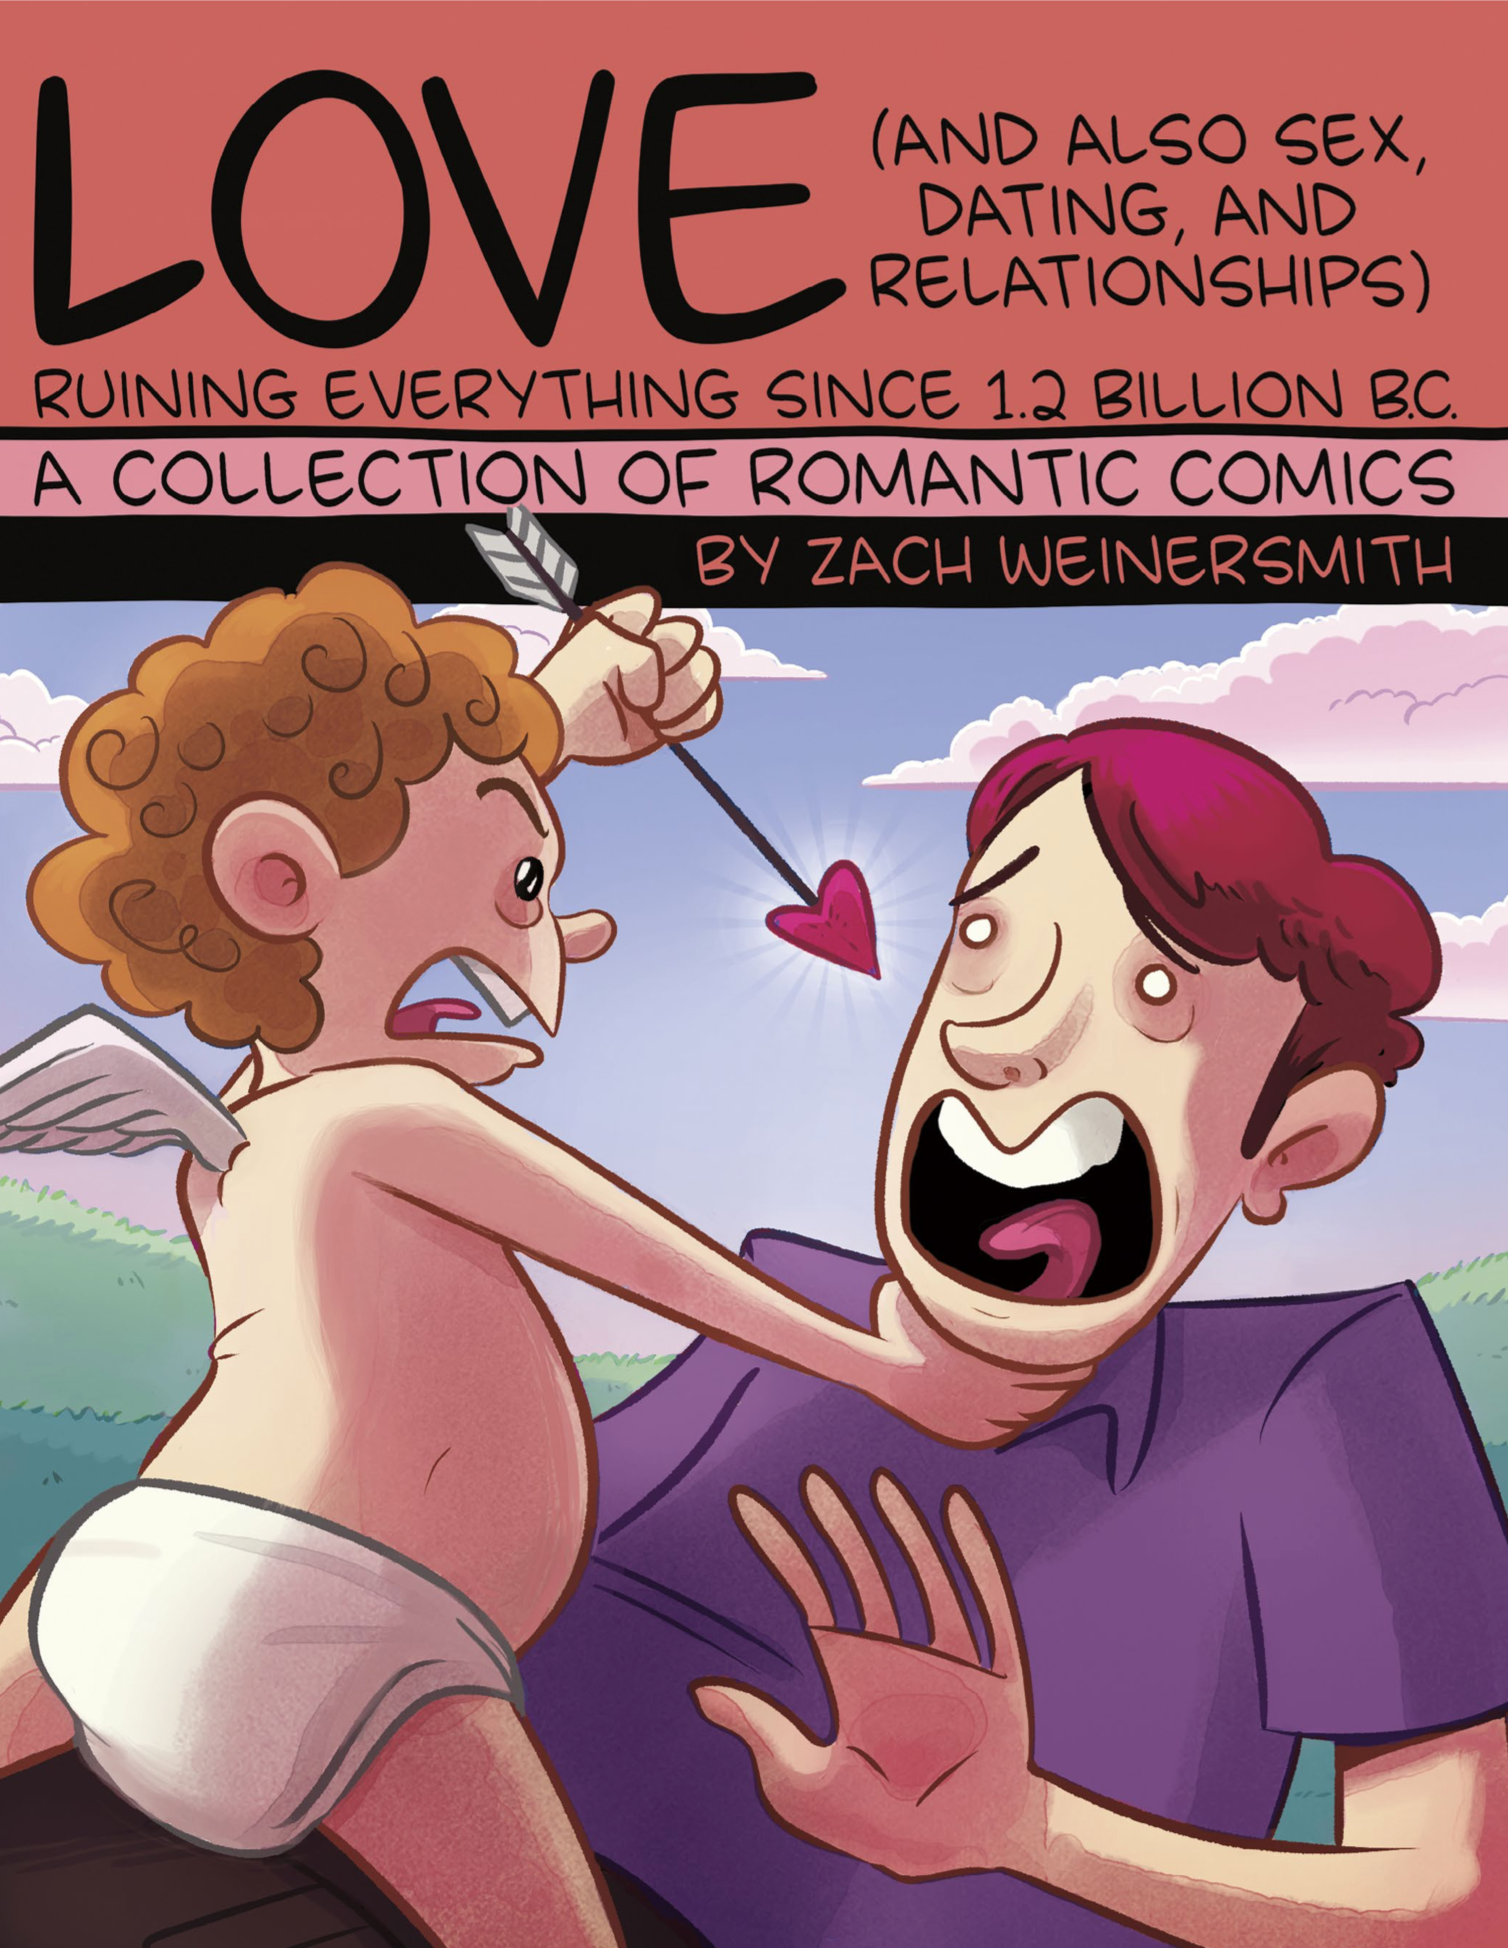 Love: Ruining Everything Since 1.2 Billion BC from SMBC - Webcomic Merchandise 